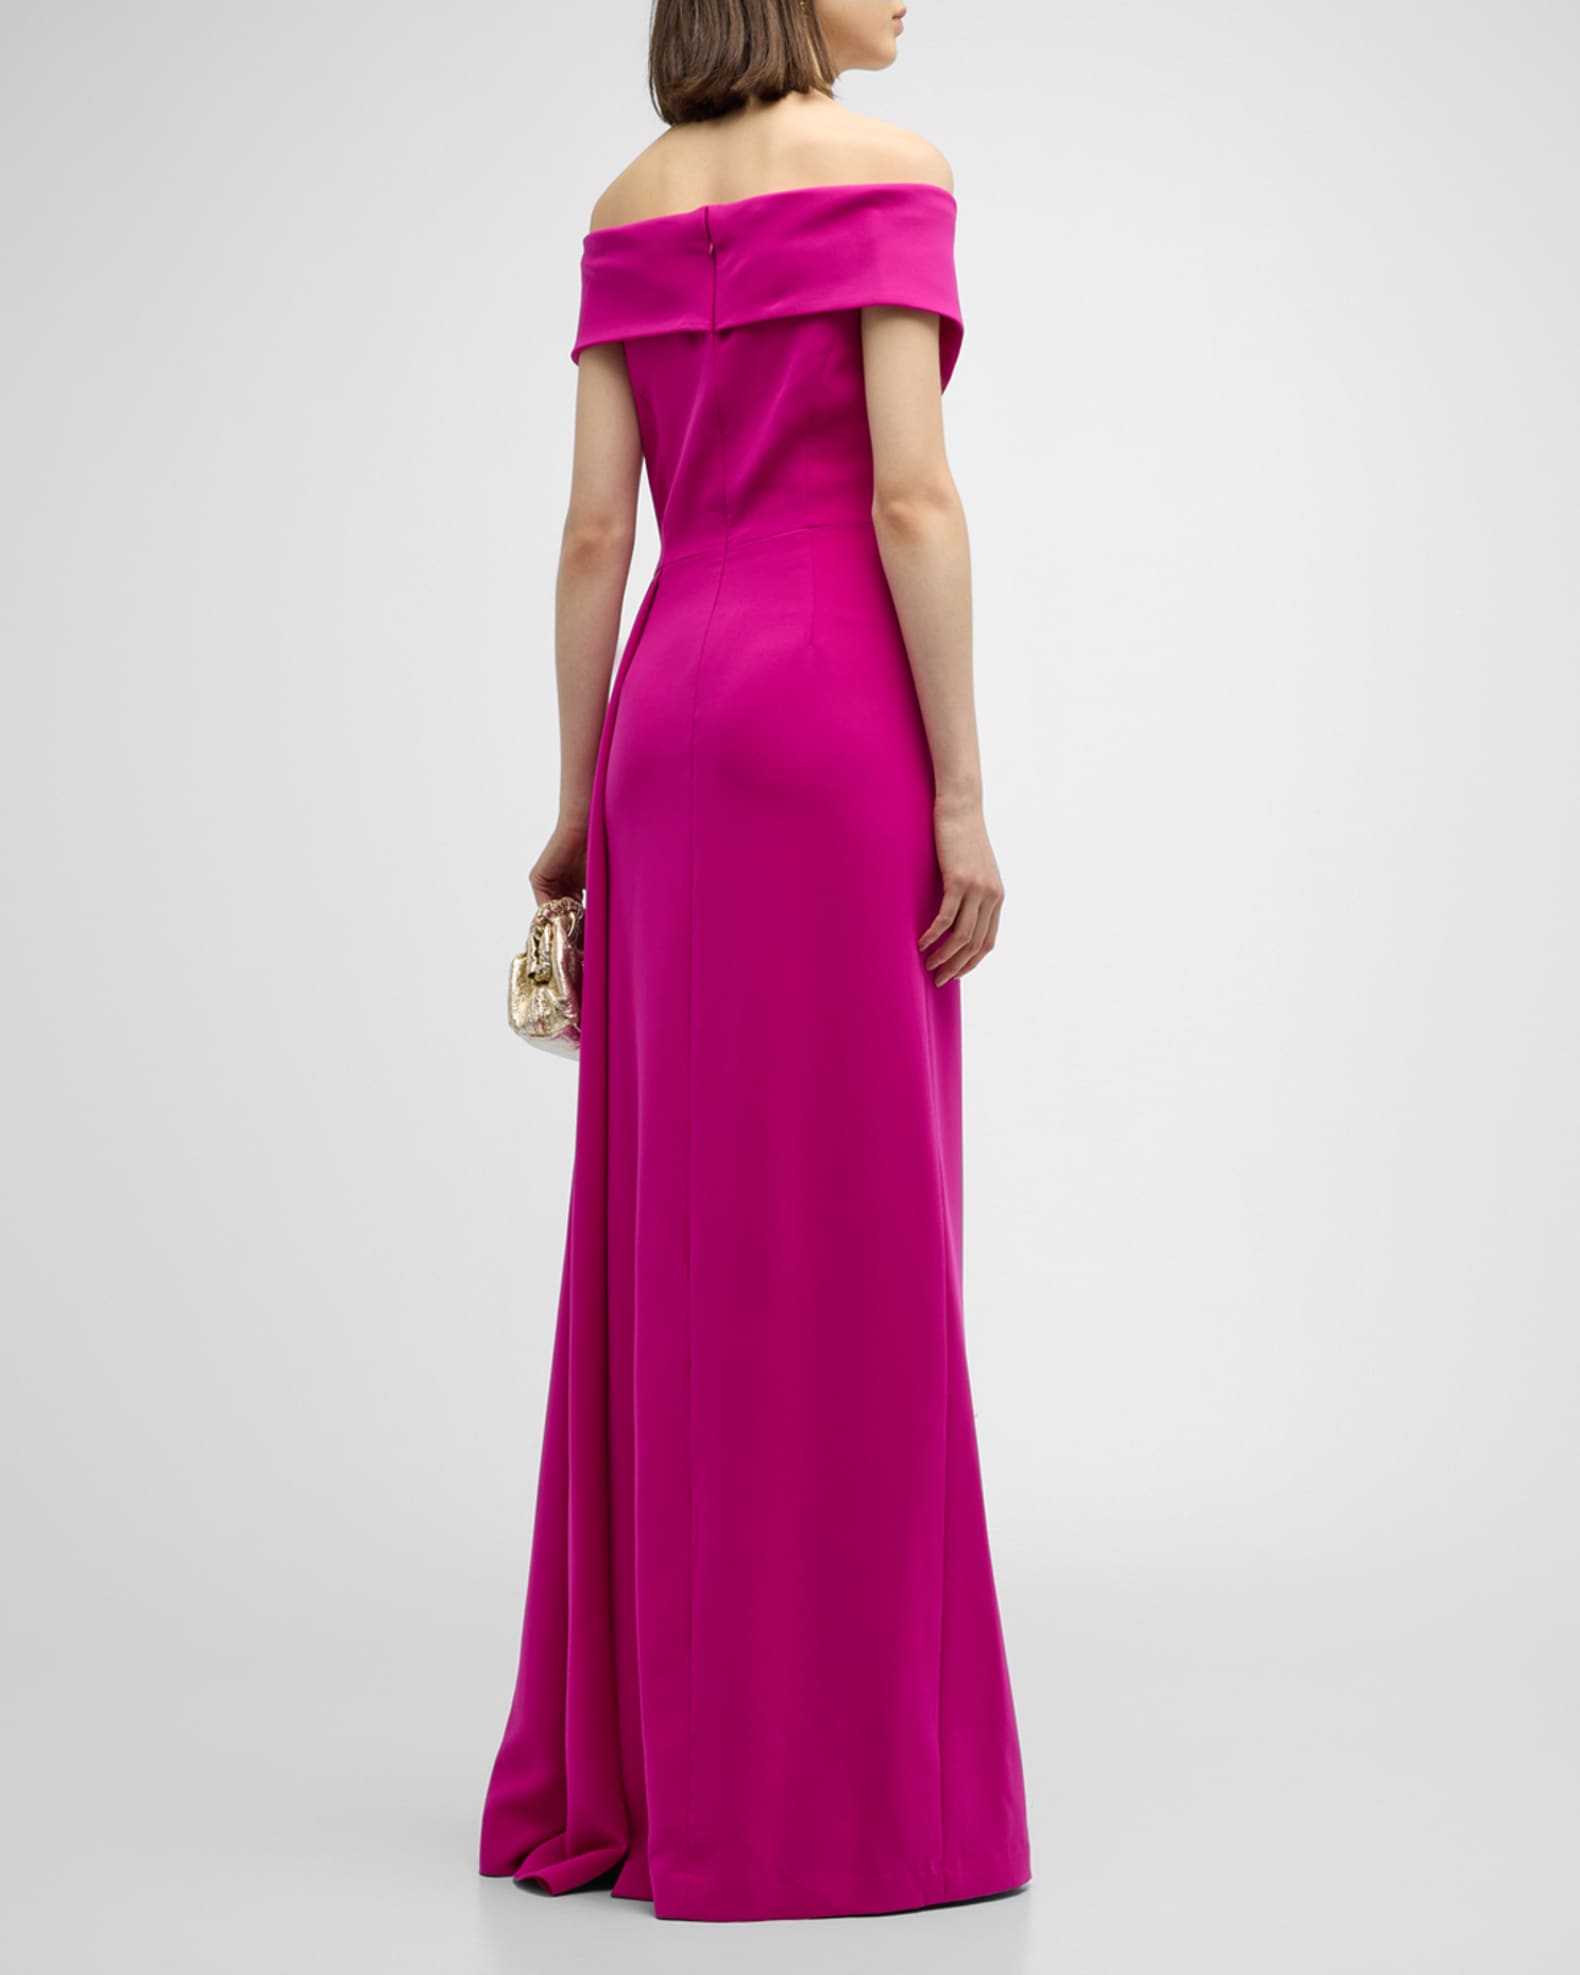 Rickie Freeman for Teri Jon Pleated Off-Shoulder Draped Crepe Gown ...